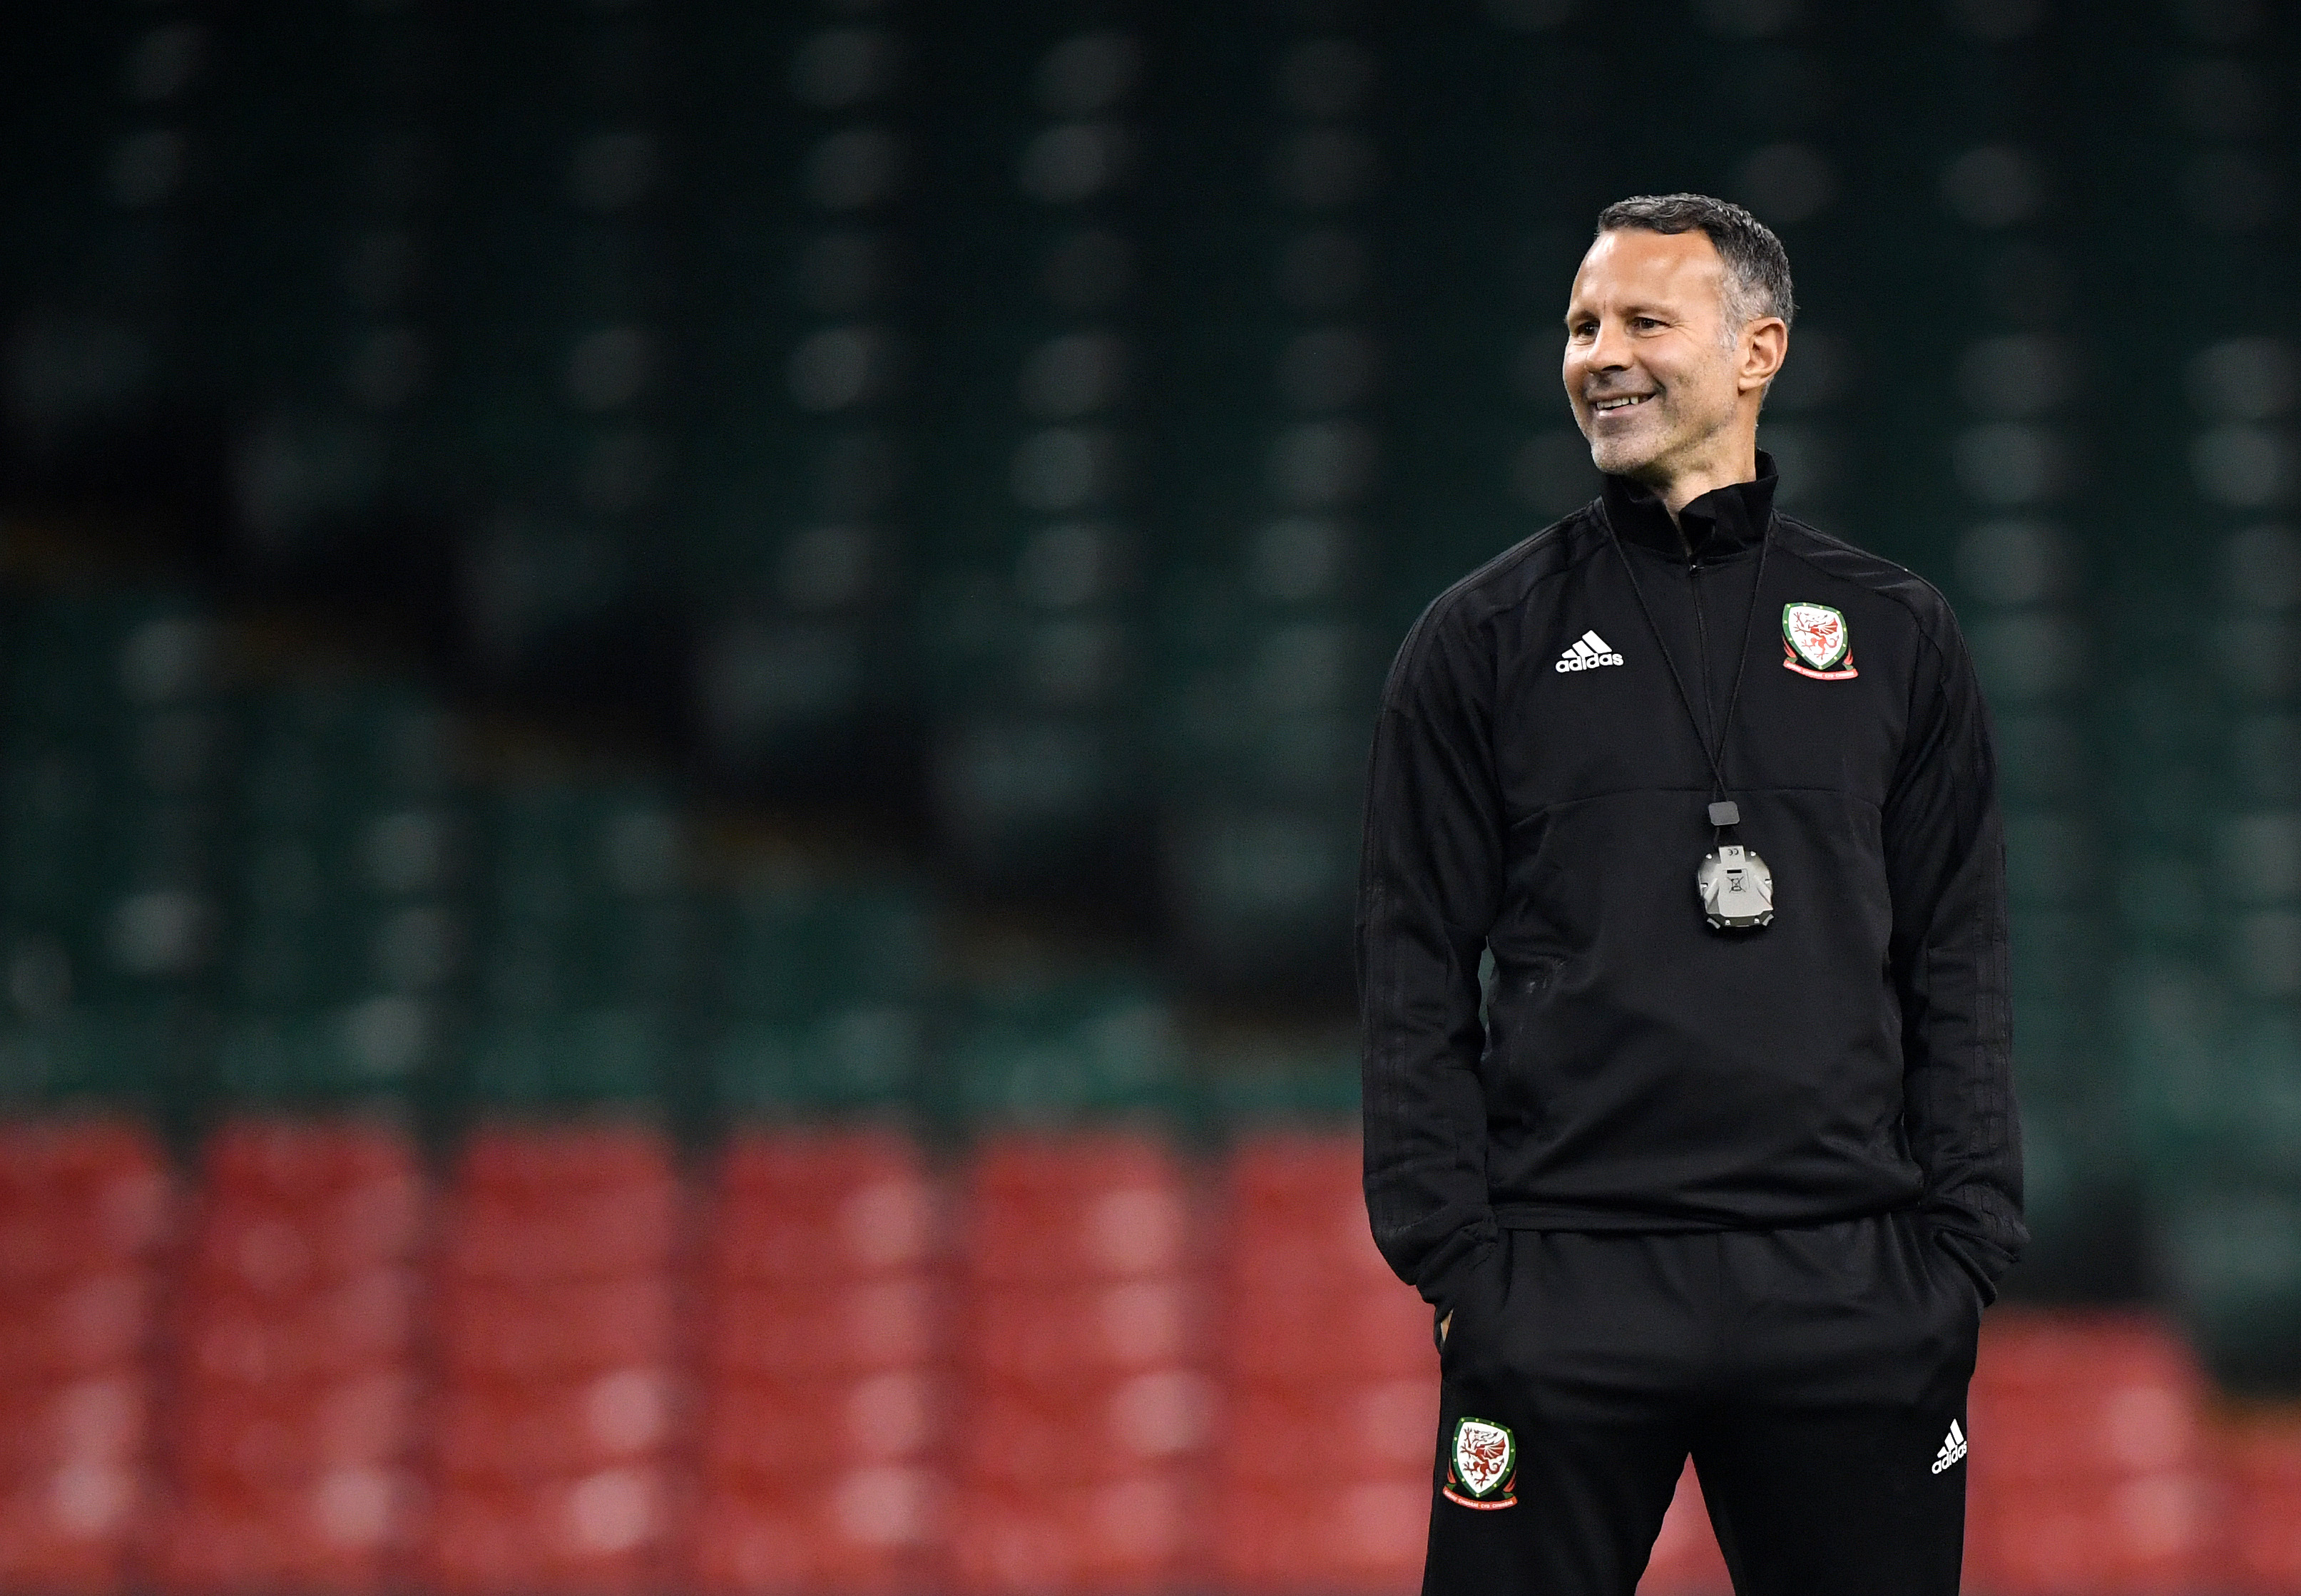 CARDIFF, WALES - OCTOBER 10:  Ryan Giggs, Manager of Wales looks on during a Wales Training Session at Principality Stadium on October 10, 2018 in Cardiff, Wales.  (Photo by Stu Forster/Getty Images)